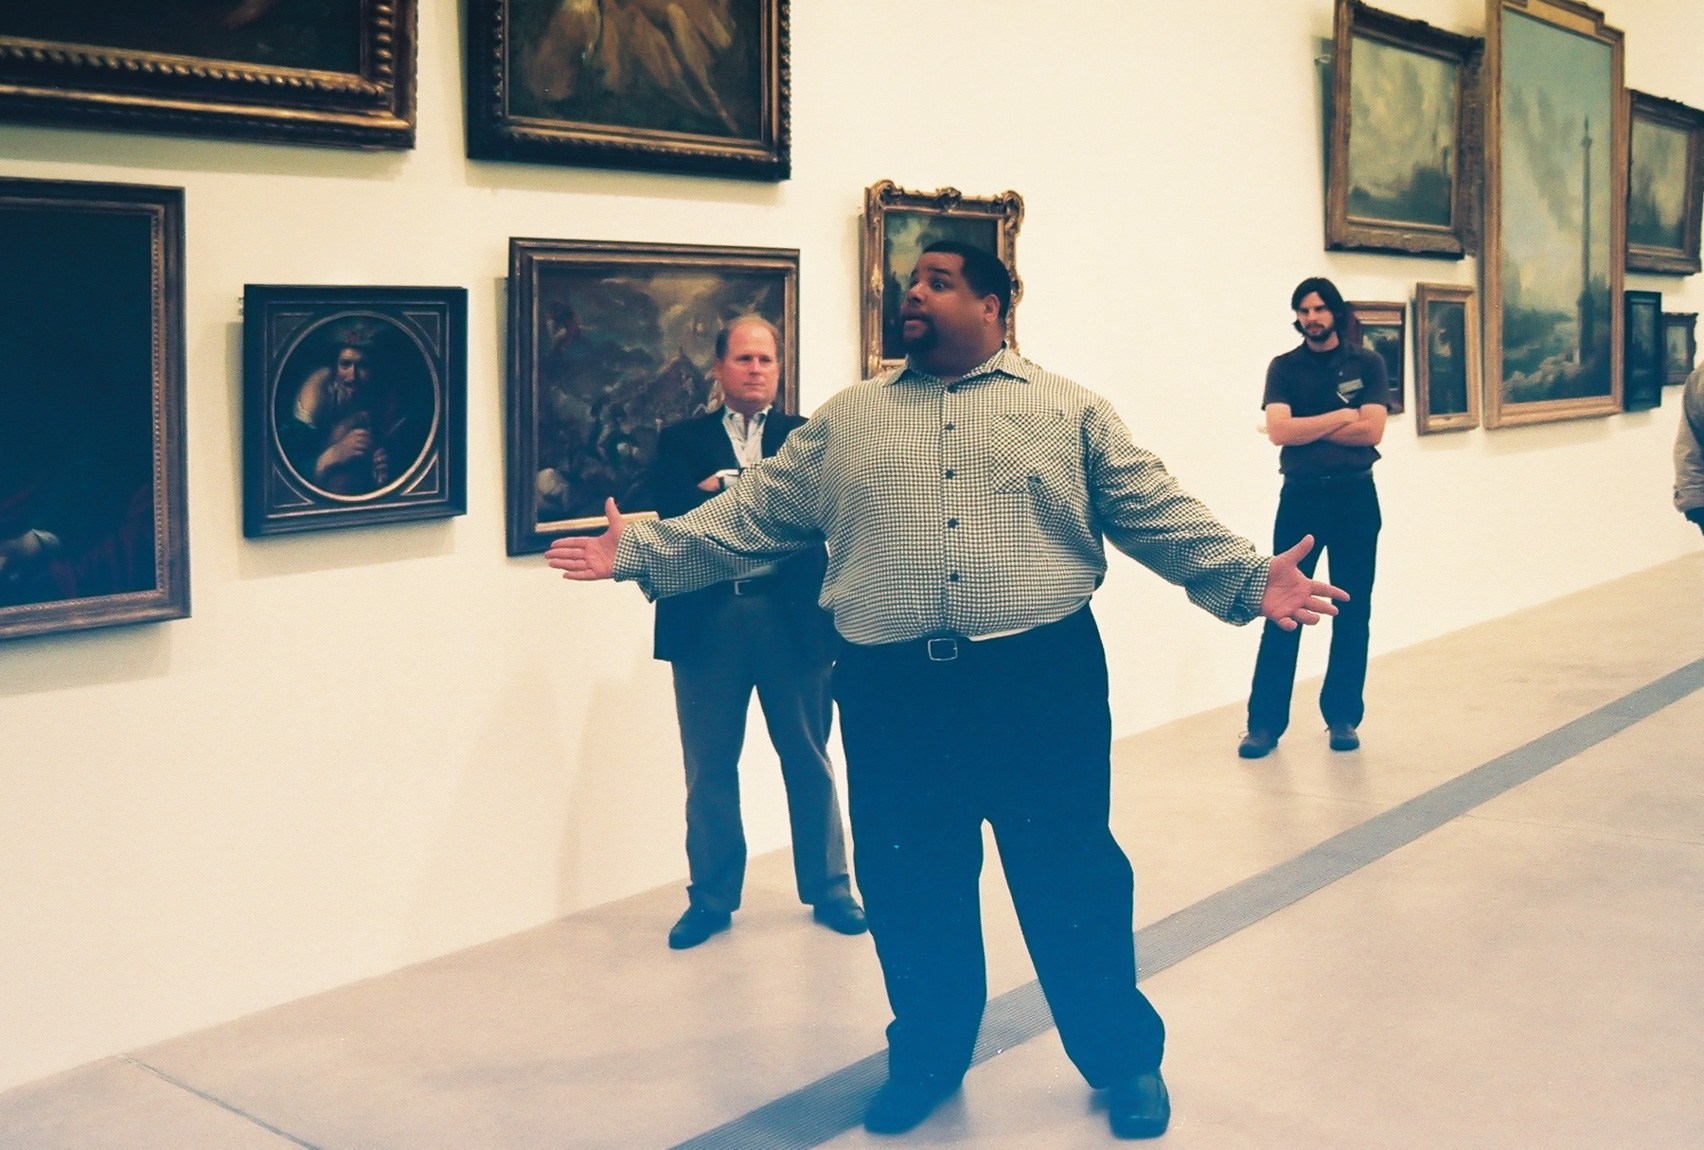 An individual speaks to a crowd in front of a wall of paintings in the Main Gallery.